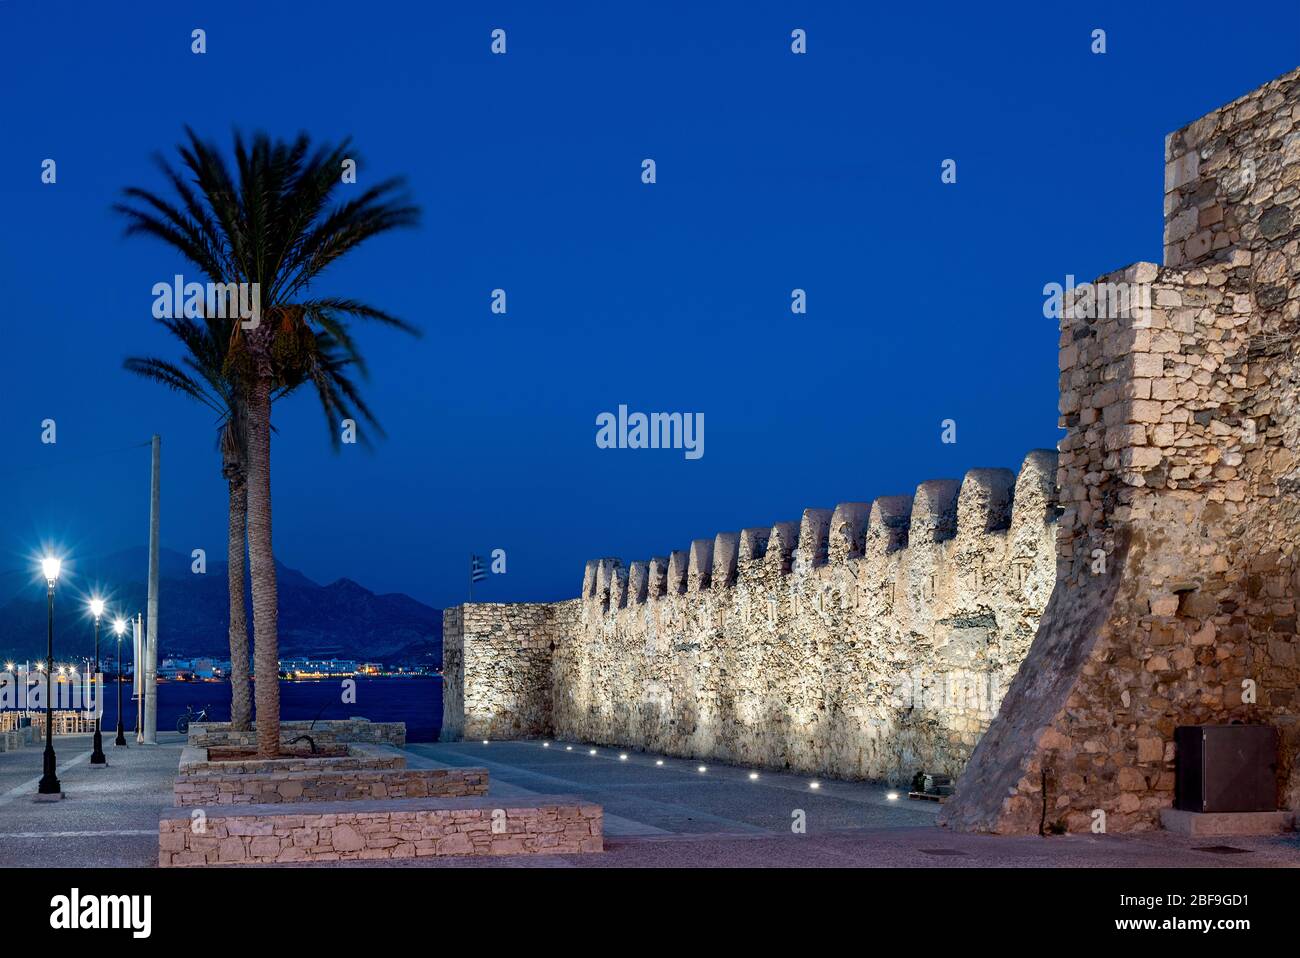 View of the old, Venetian castle of Ierapetra town, known by its Turkish name 'Kales'. Lassithi, Crete, Greece. Stock Photo